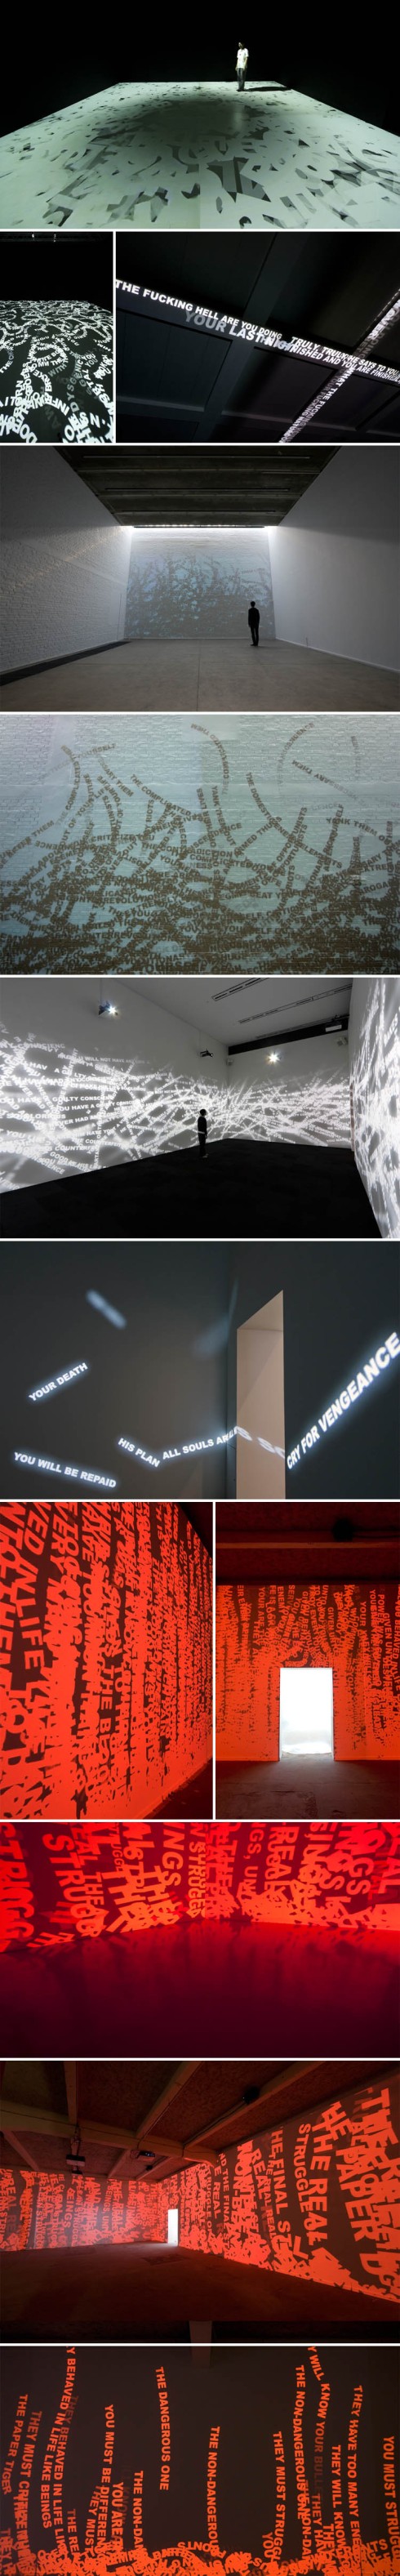 Dynamic projected type installations, Mori Art Museum